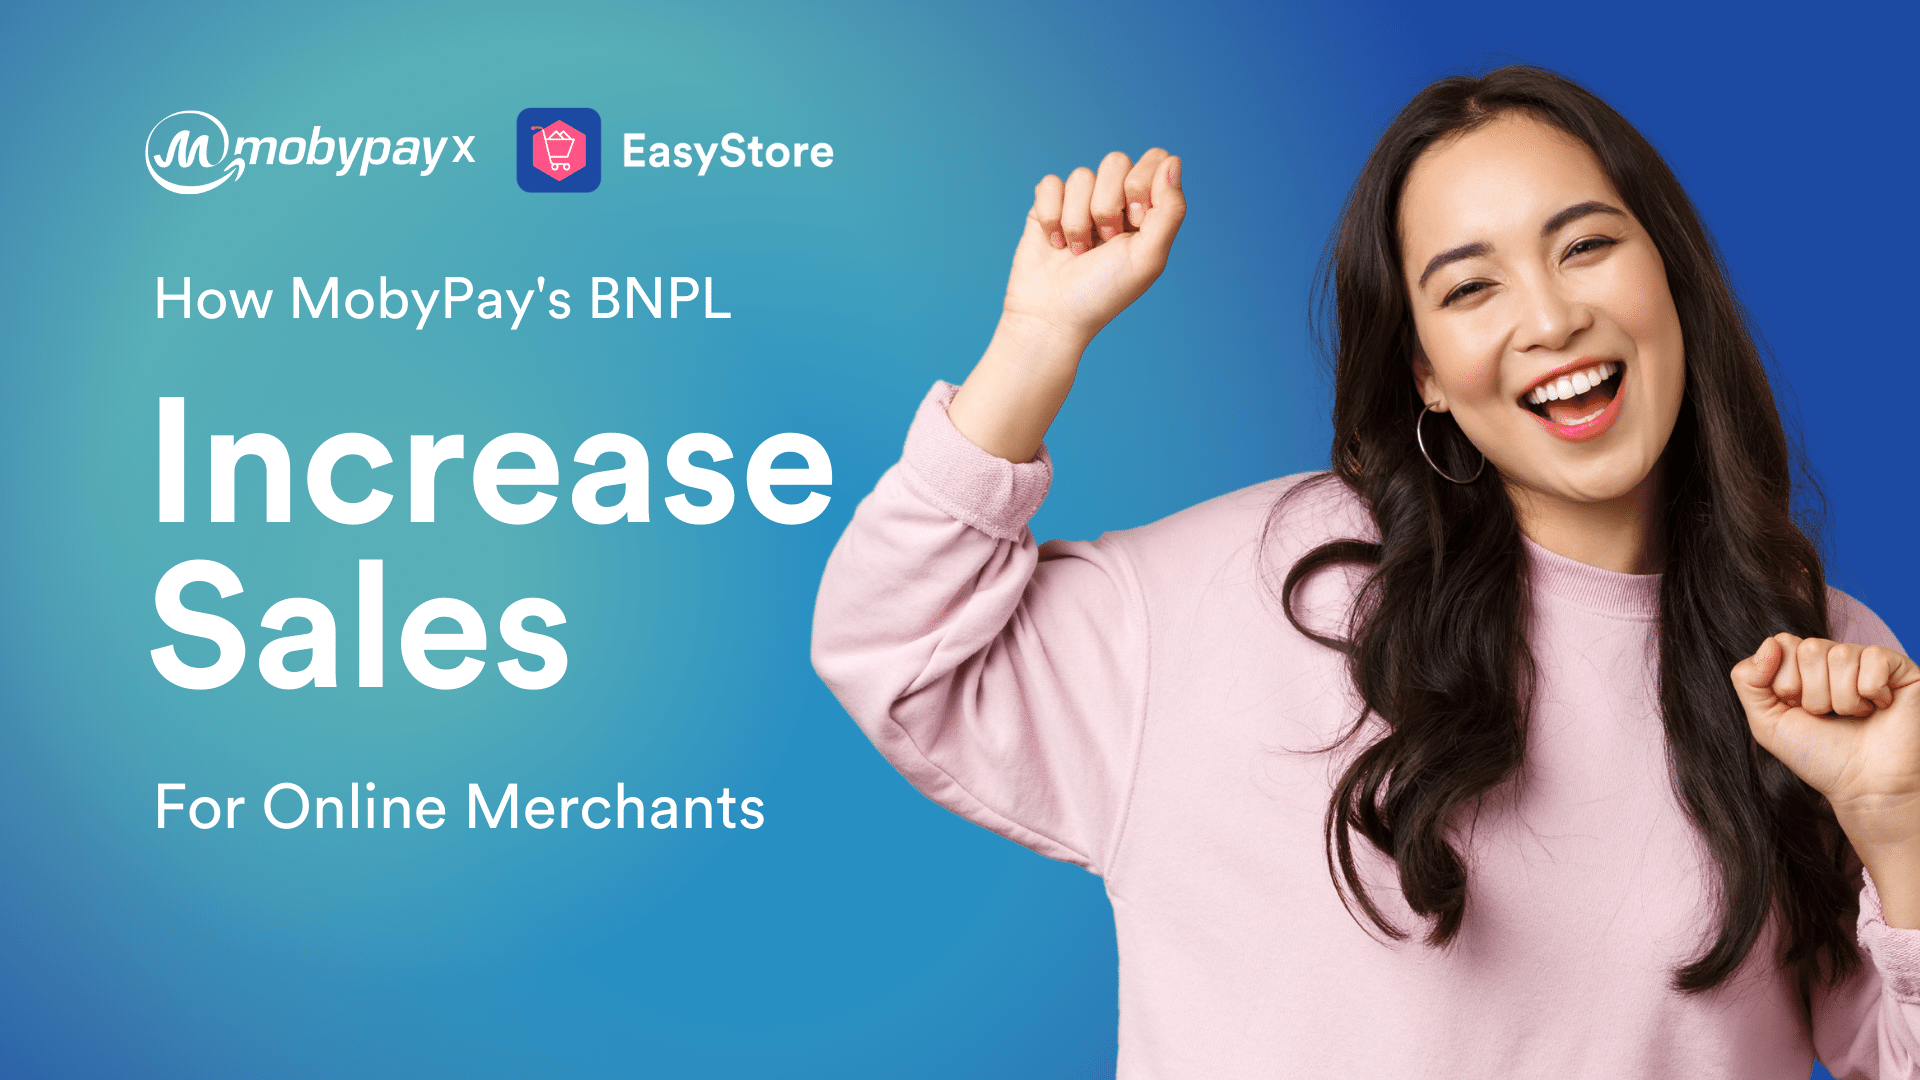 How MobyPay's BNPL Increase Sales for Online Merchants | EasyStore